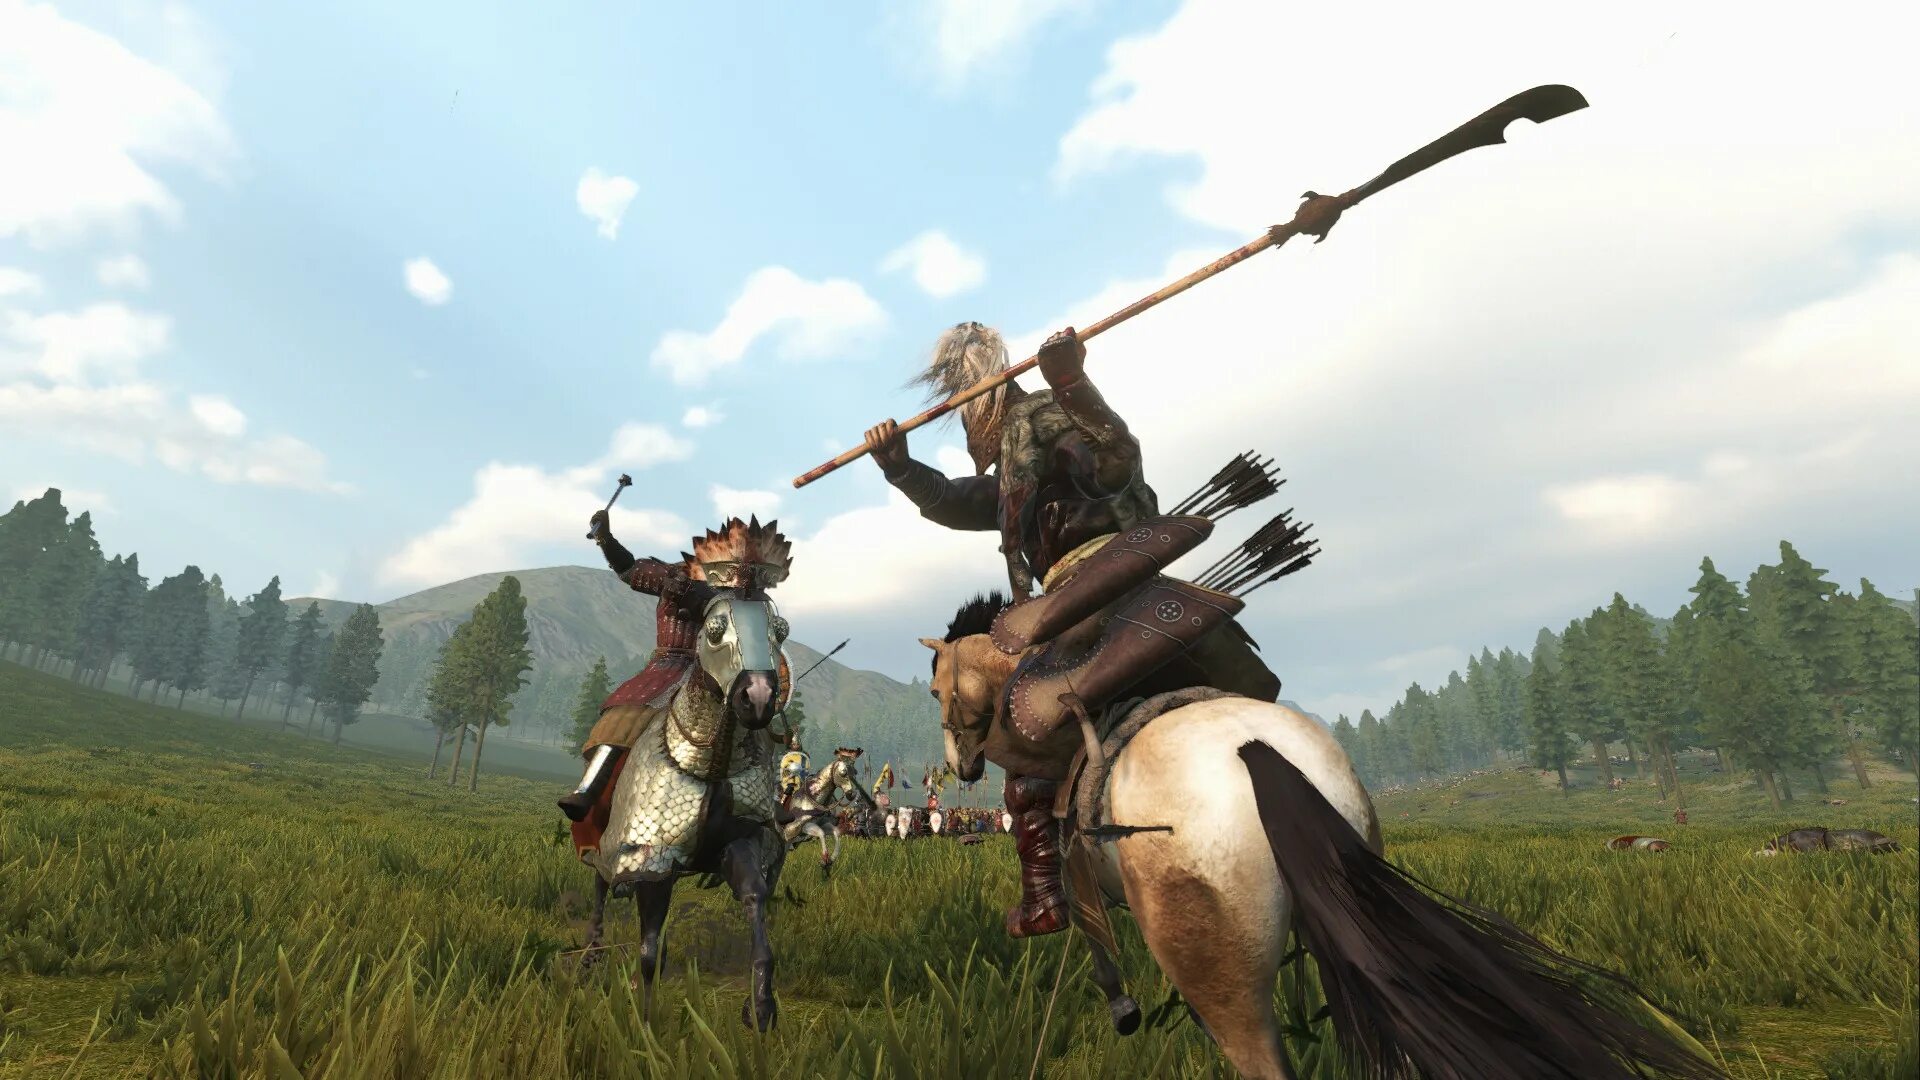 Mount and Blade 2 Bannerlord. Mount and Blade 2 Bannerlord СТУРГИЯ. Монтан блейд баннерлорд. Mount and Blade 2 Bannerlord Фалькс. Warband bannerlord